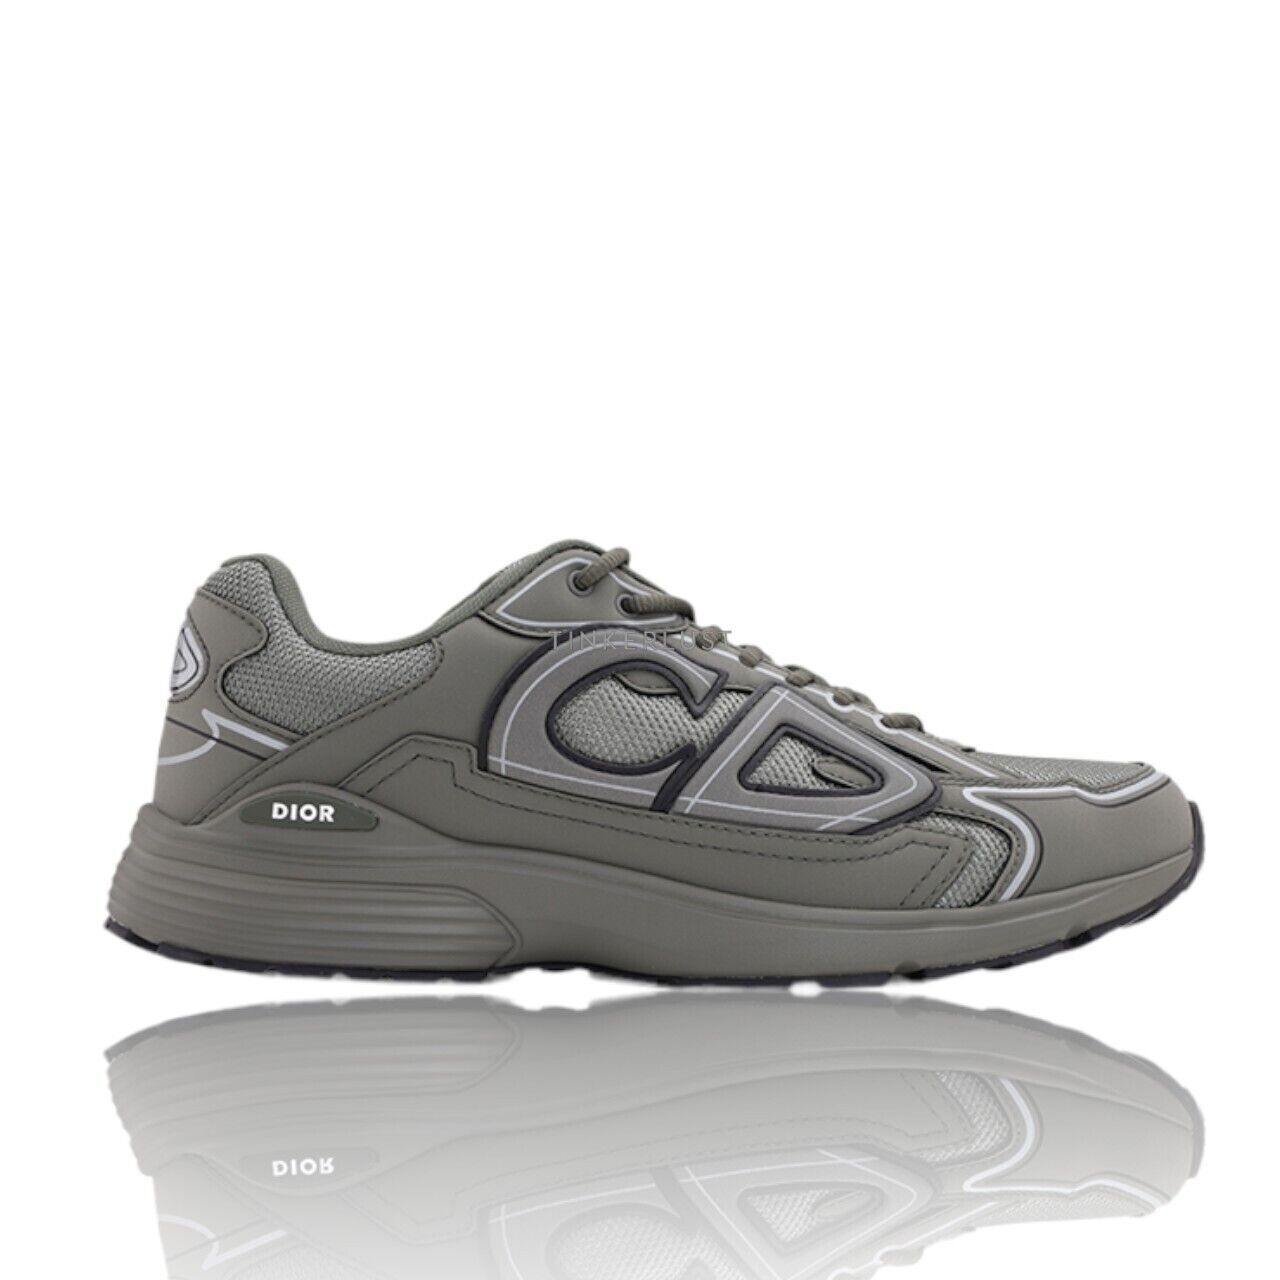 Christian Dior B30 in Olive Mesh and Technical Fabric Low Top Sneakers